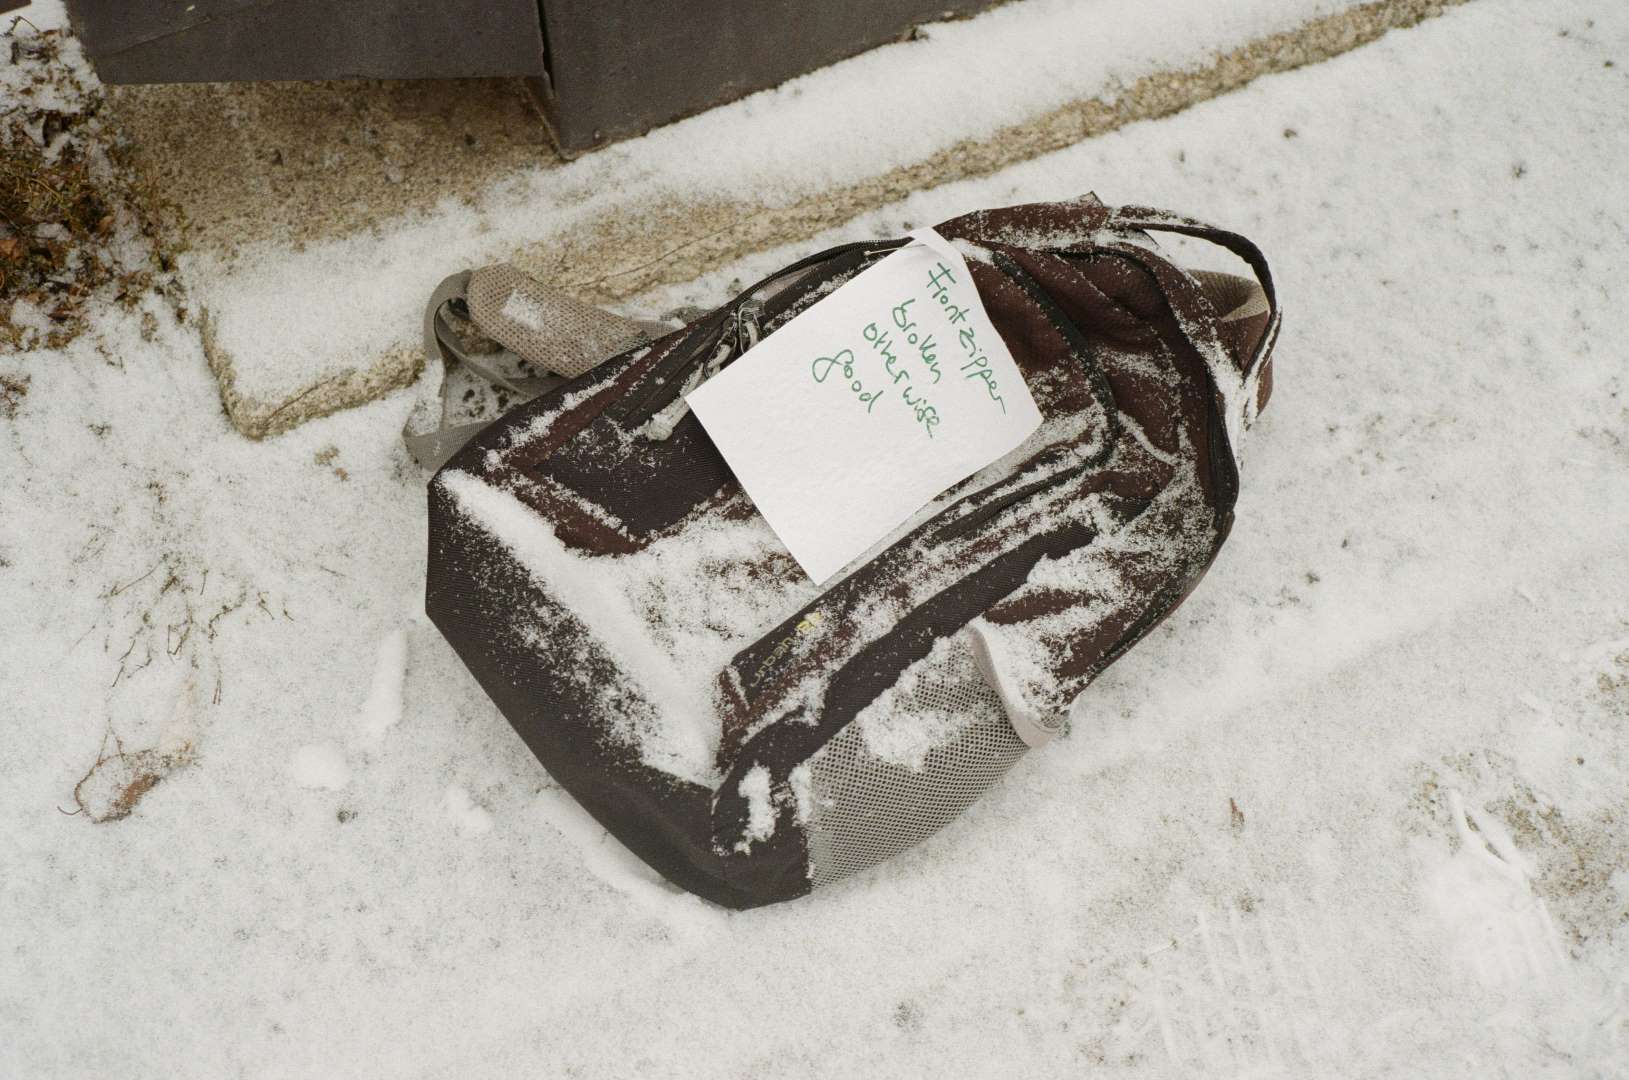 A colour photograph of a backpack left in the snow with a note 'front zipper broken, otherwise good - free'